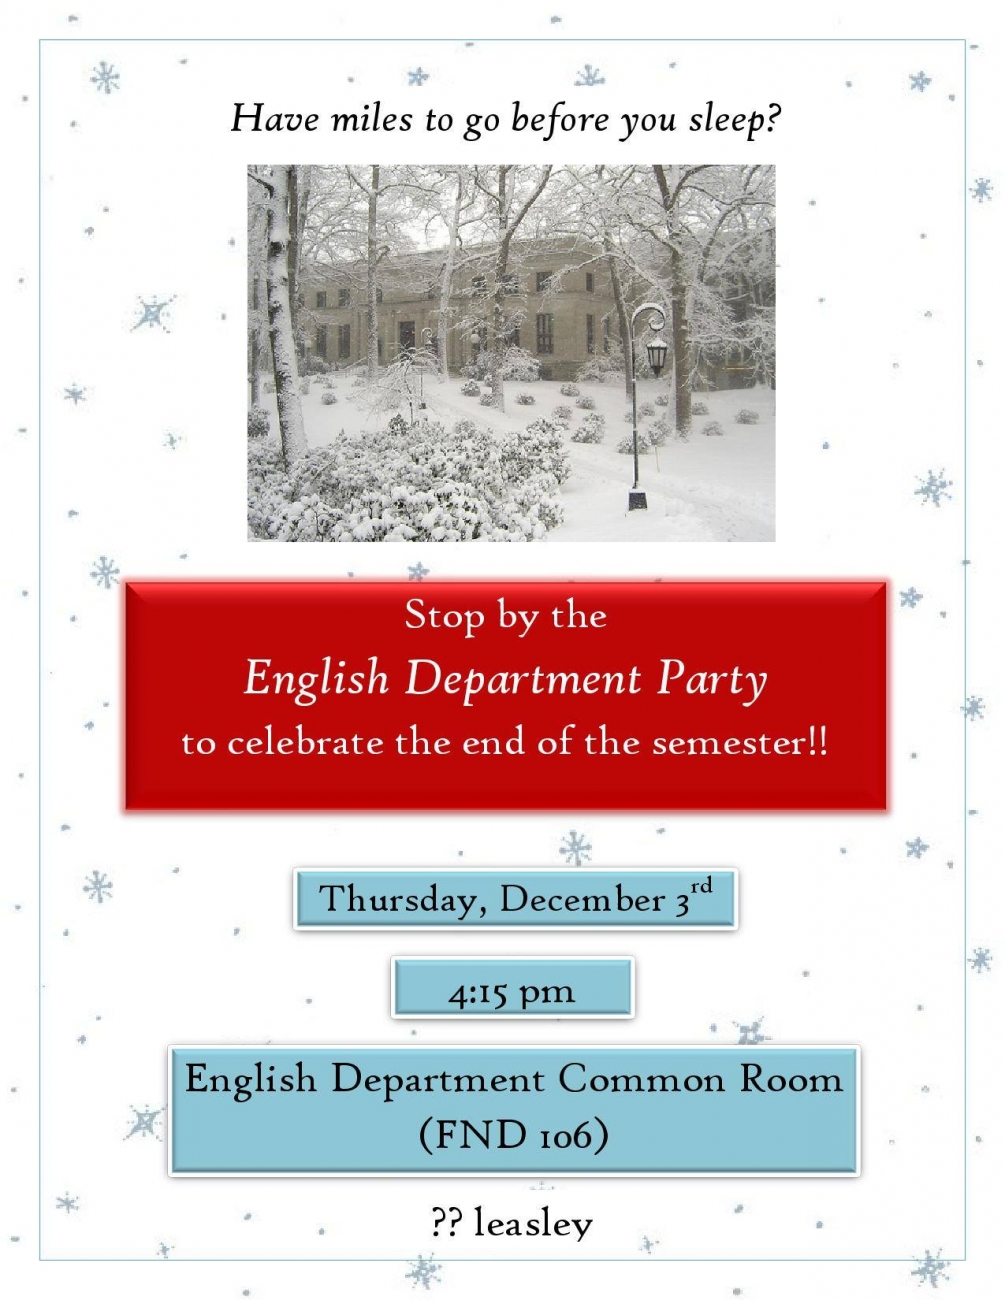 The English Department celebrates the end of the semester